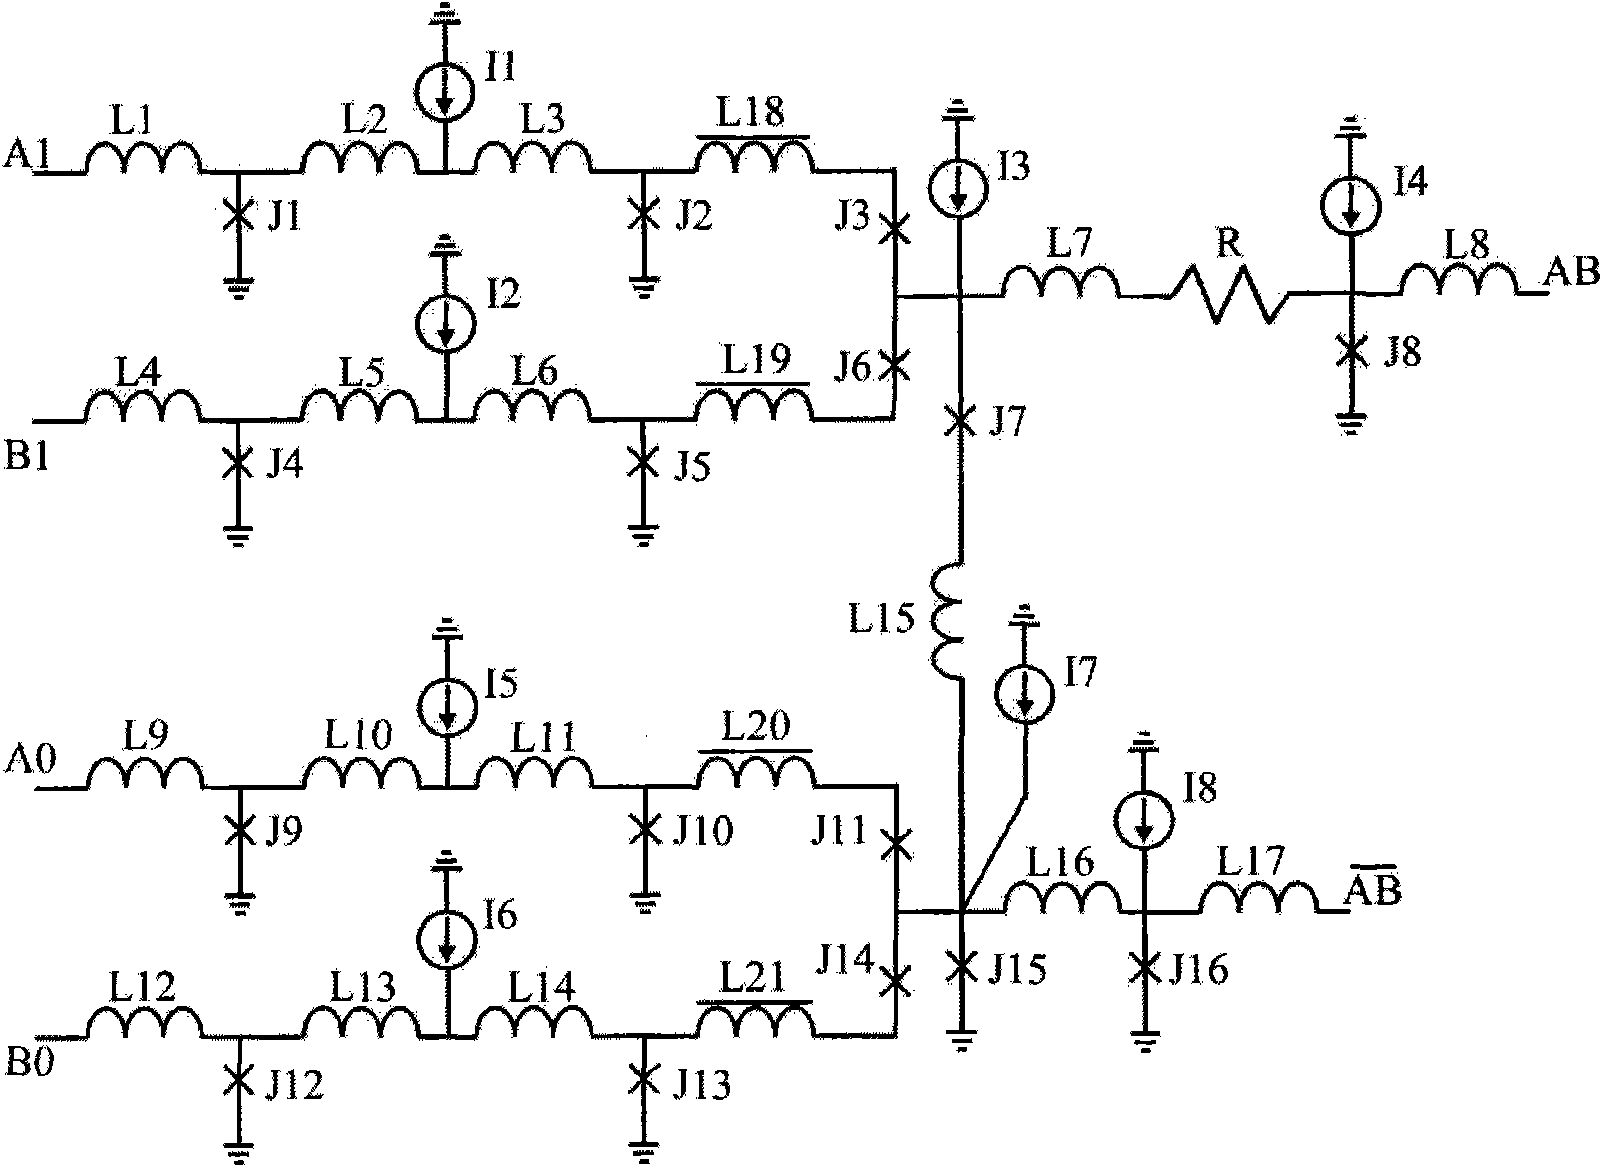 Resistive superconductive asynchronous bilinear logic AND gate circuit